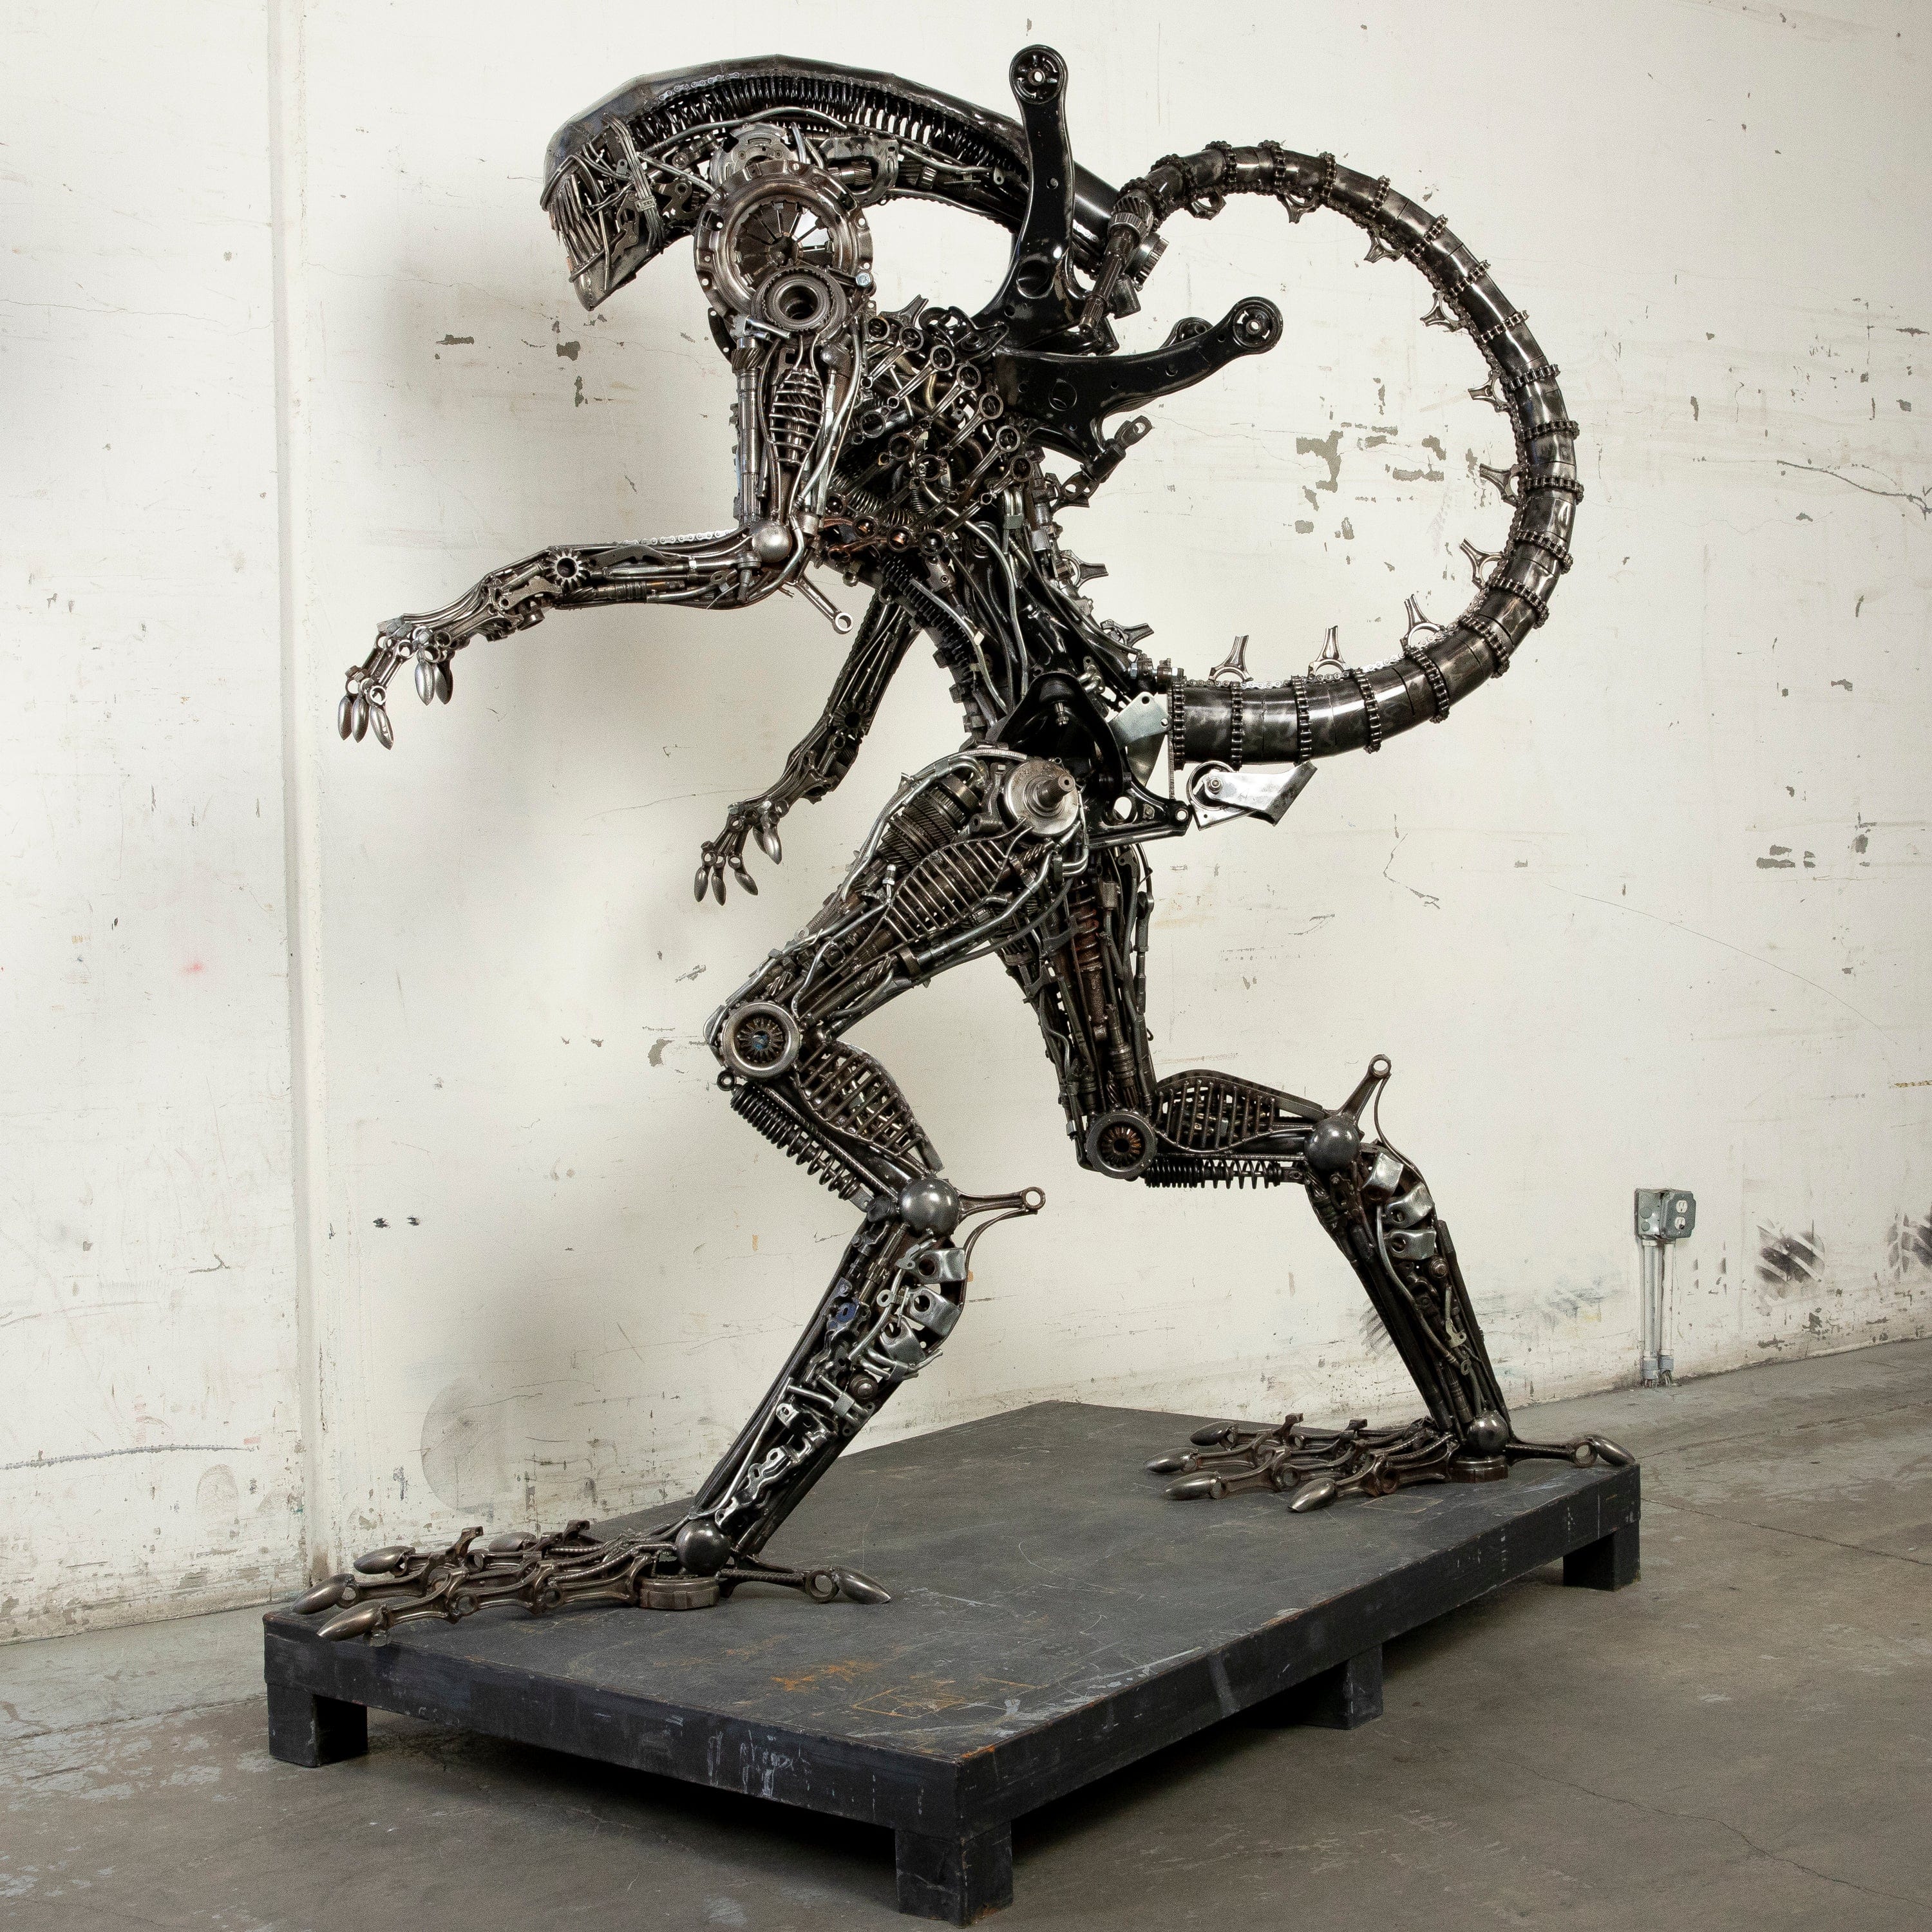 Kalifano Recycled Metal Art 91" Alien Inspired Recycled Metal Art Sculpture RMS-A230-S08